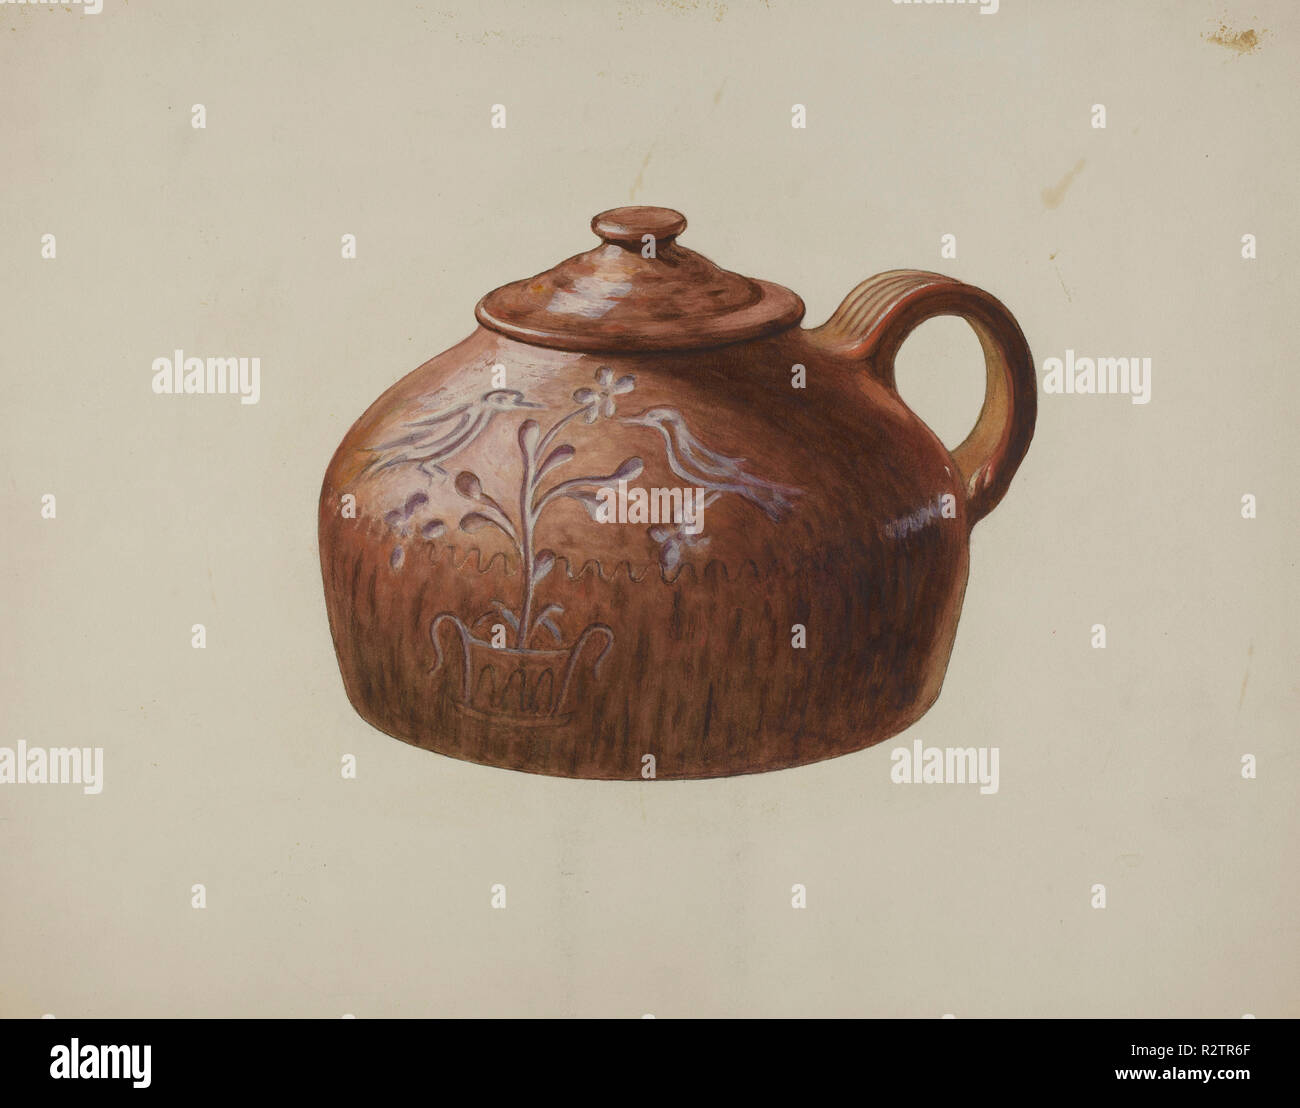 Pa. German Bean Pot with Lid. Dated: c. 1941. Dimensions: overall: 32.7 x 41.5 cm (12 7/8 x 16 5/16 in.)  Original IAD Object: 5 3/4' high; 8' in diameter. Medium: watercolor and graphite on paper. Museum: National Gallery of Art, Washington DC. Author: Henrietta S. Bukill. Stock Photo